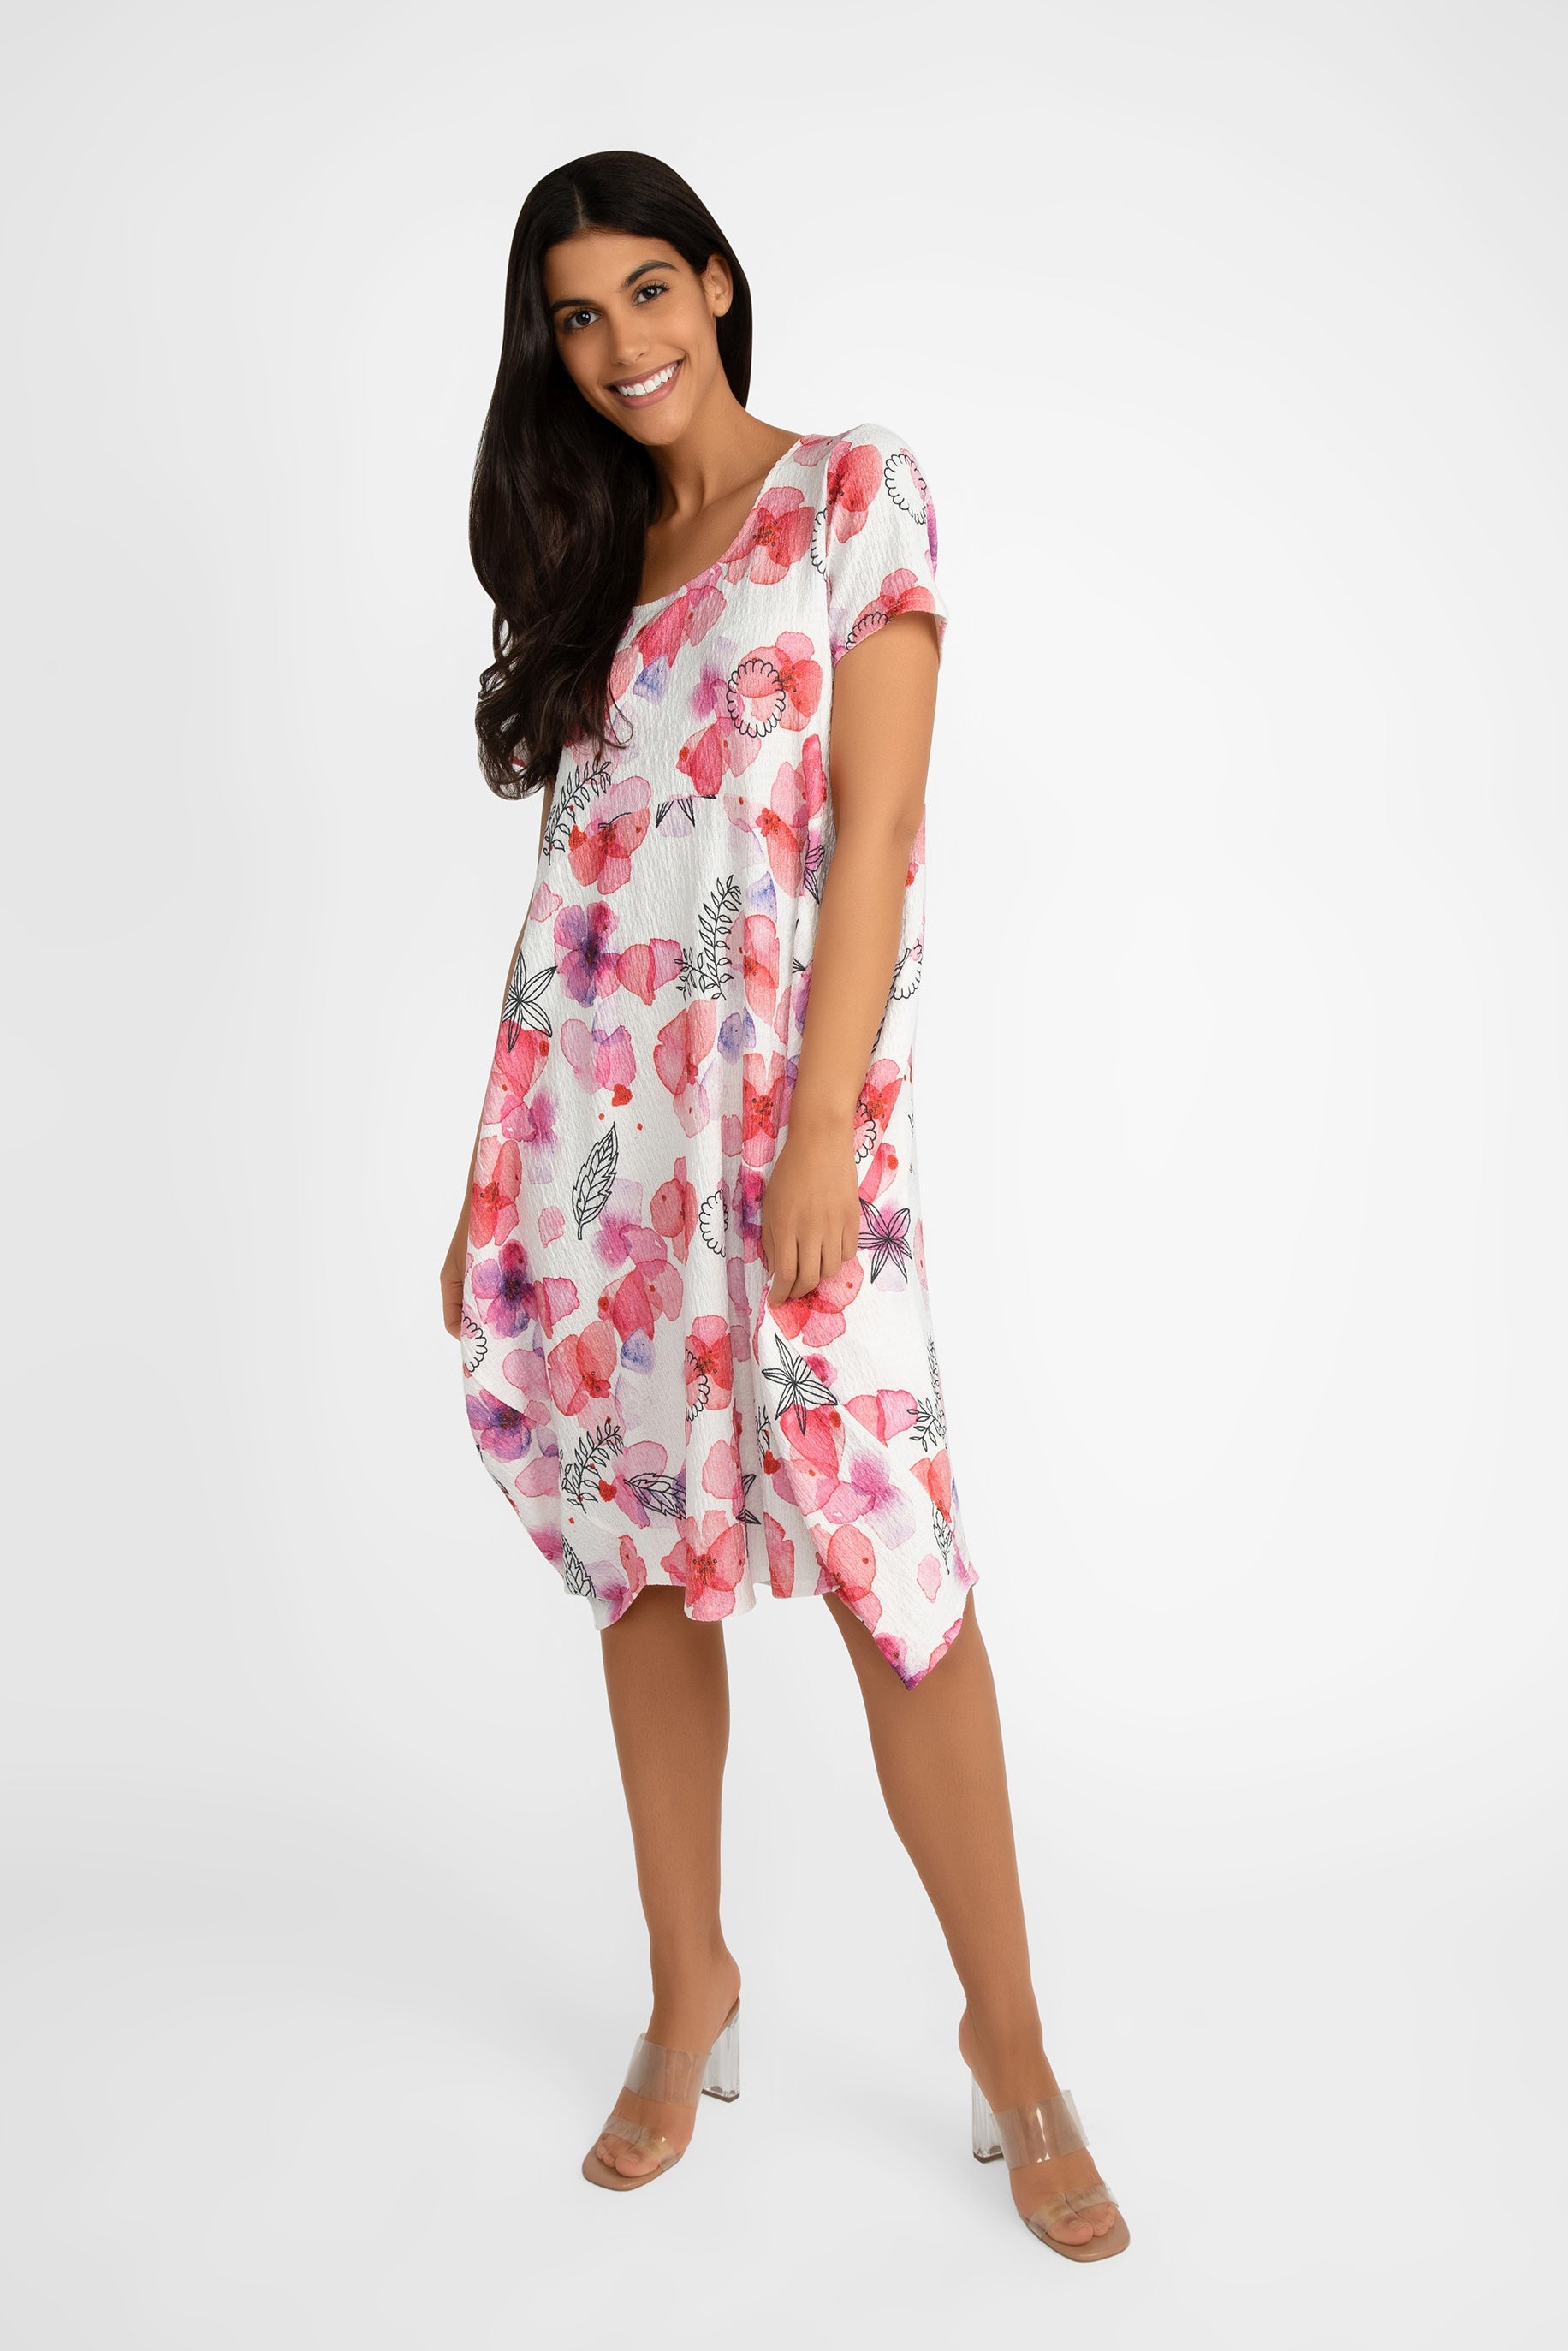 Compli K (33566) Women's Short Sleeve White With Pink Floral Cocoon Midi Dress